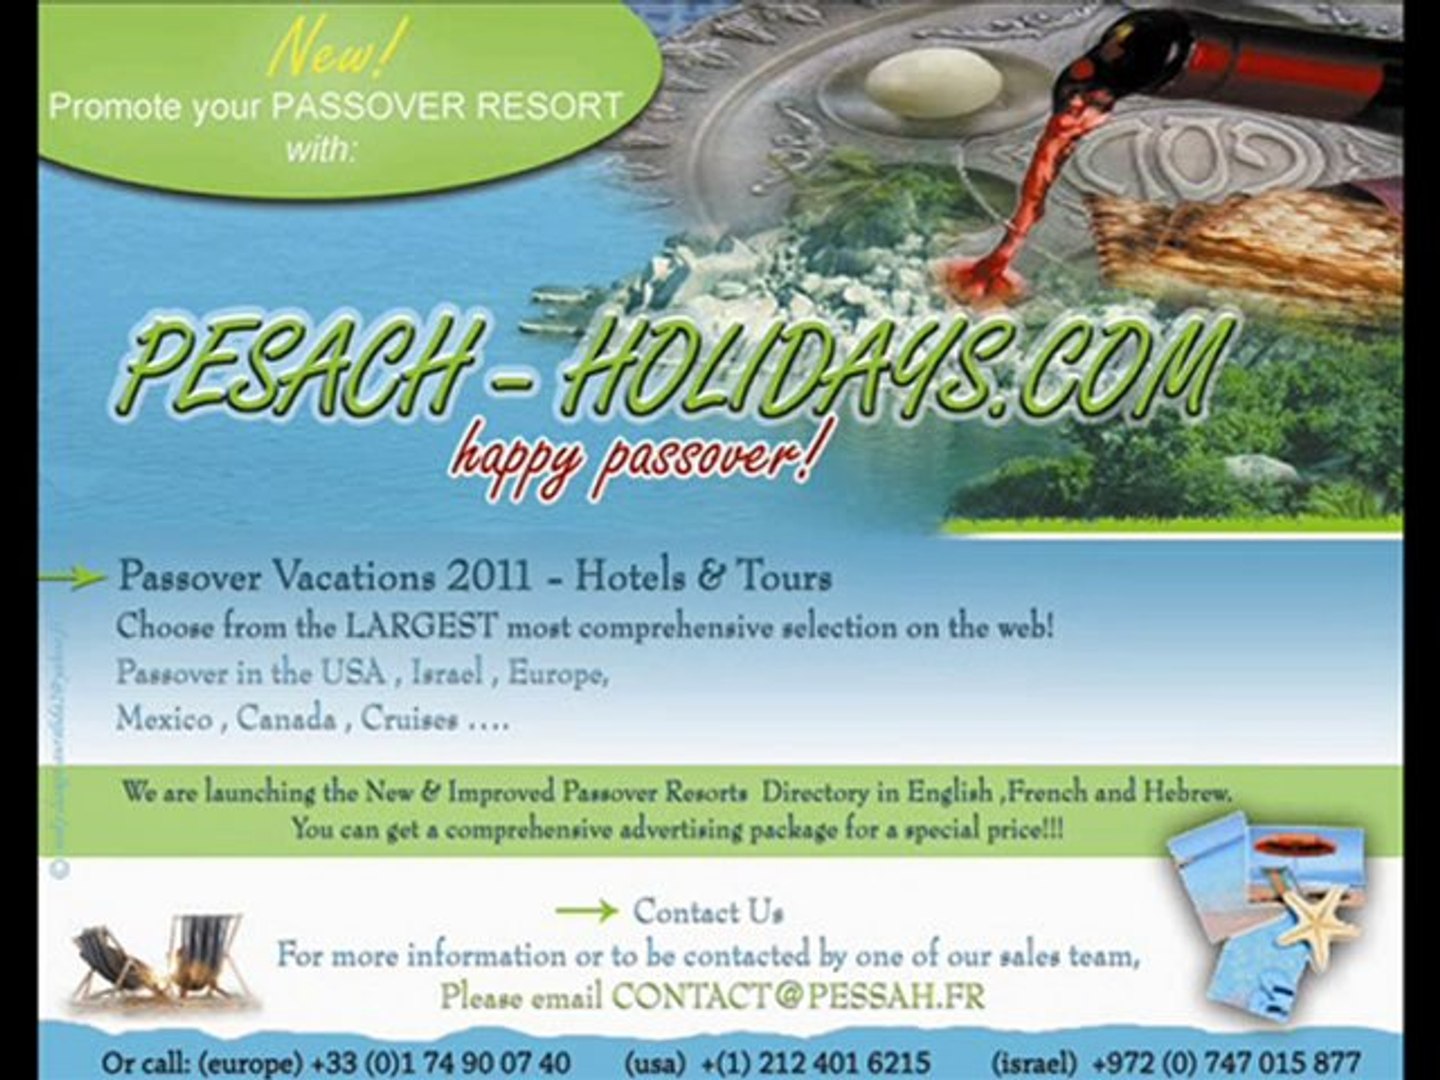 ⁣PESACH VACATIONS ISRAEL 2013 passover israel holidays israel hotels pesach deals